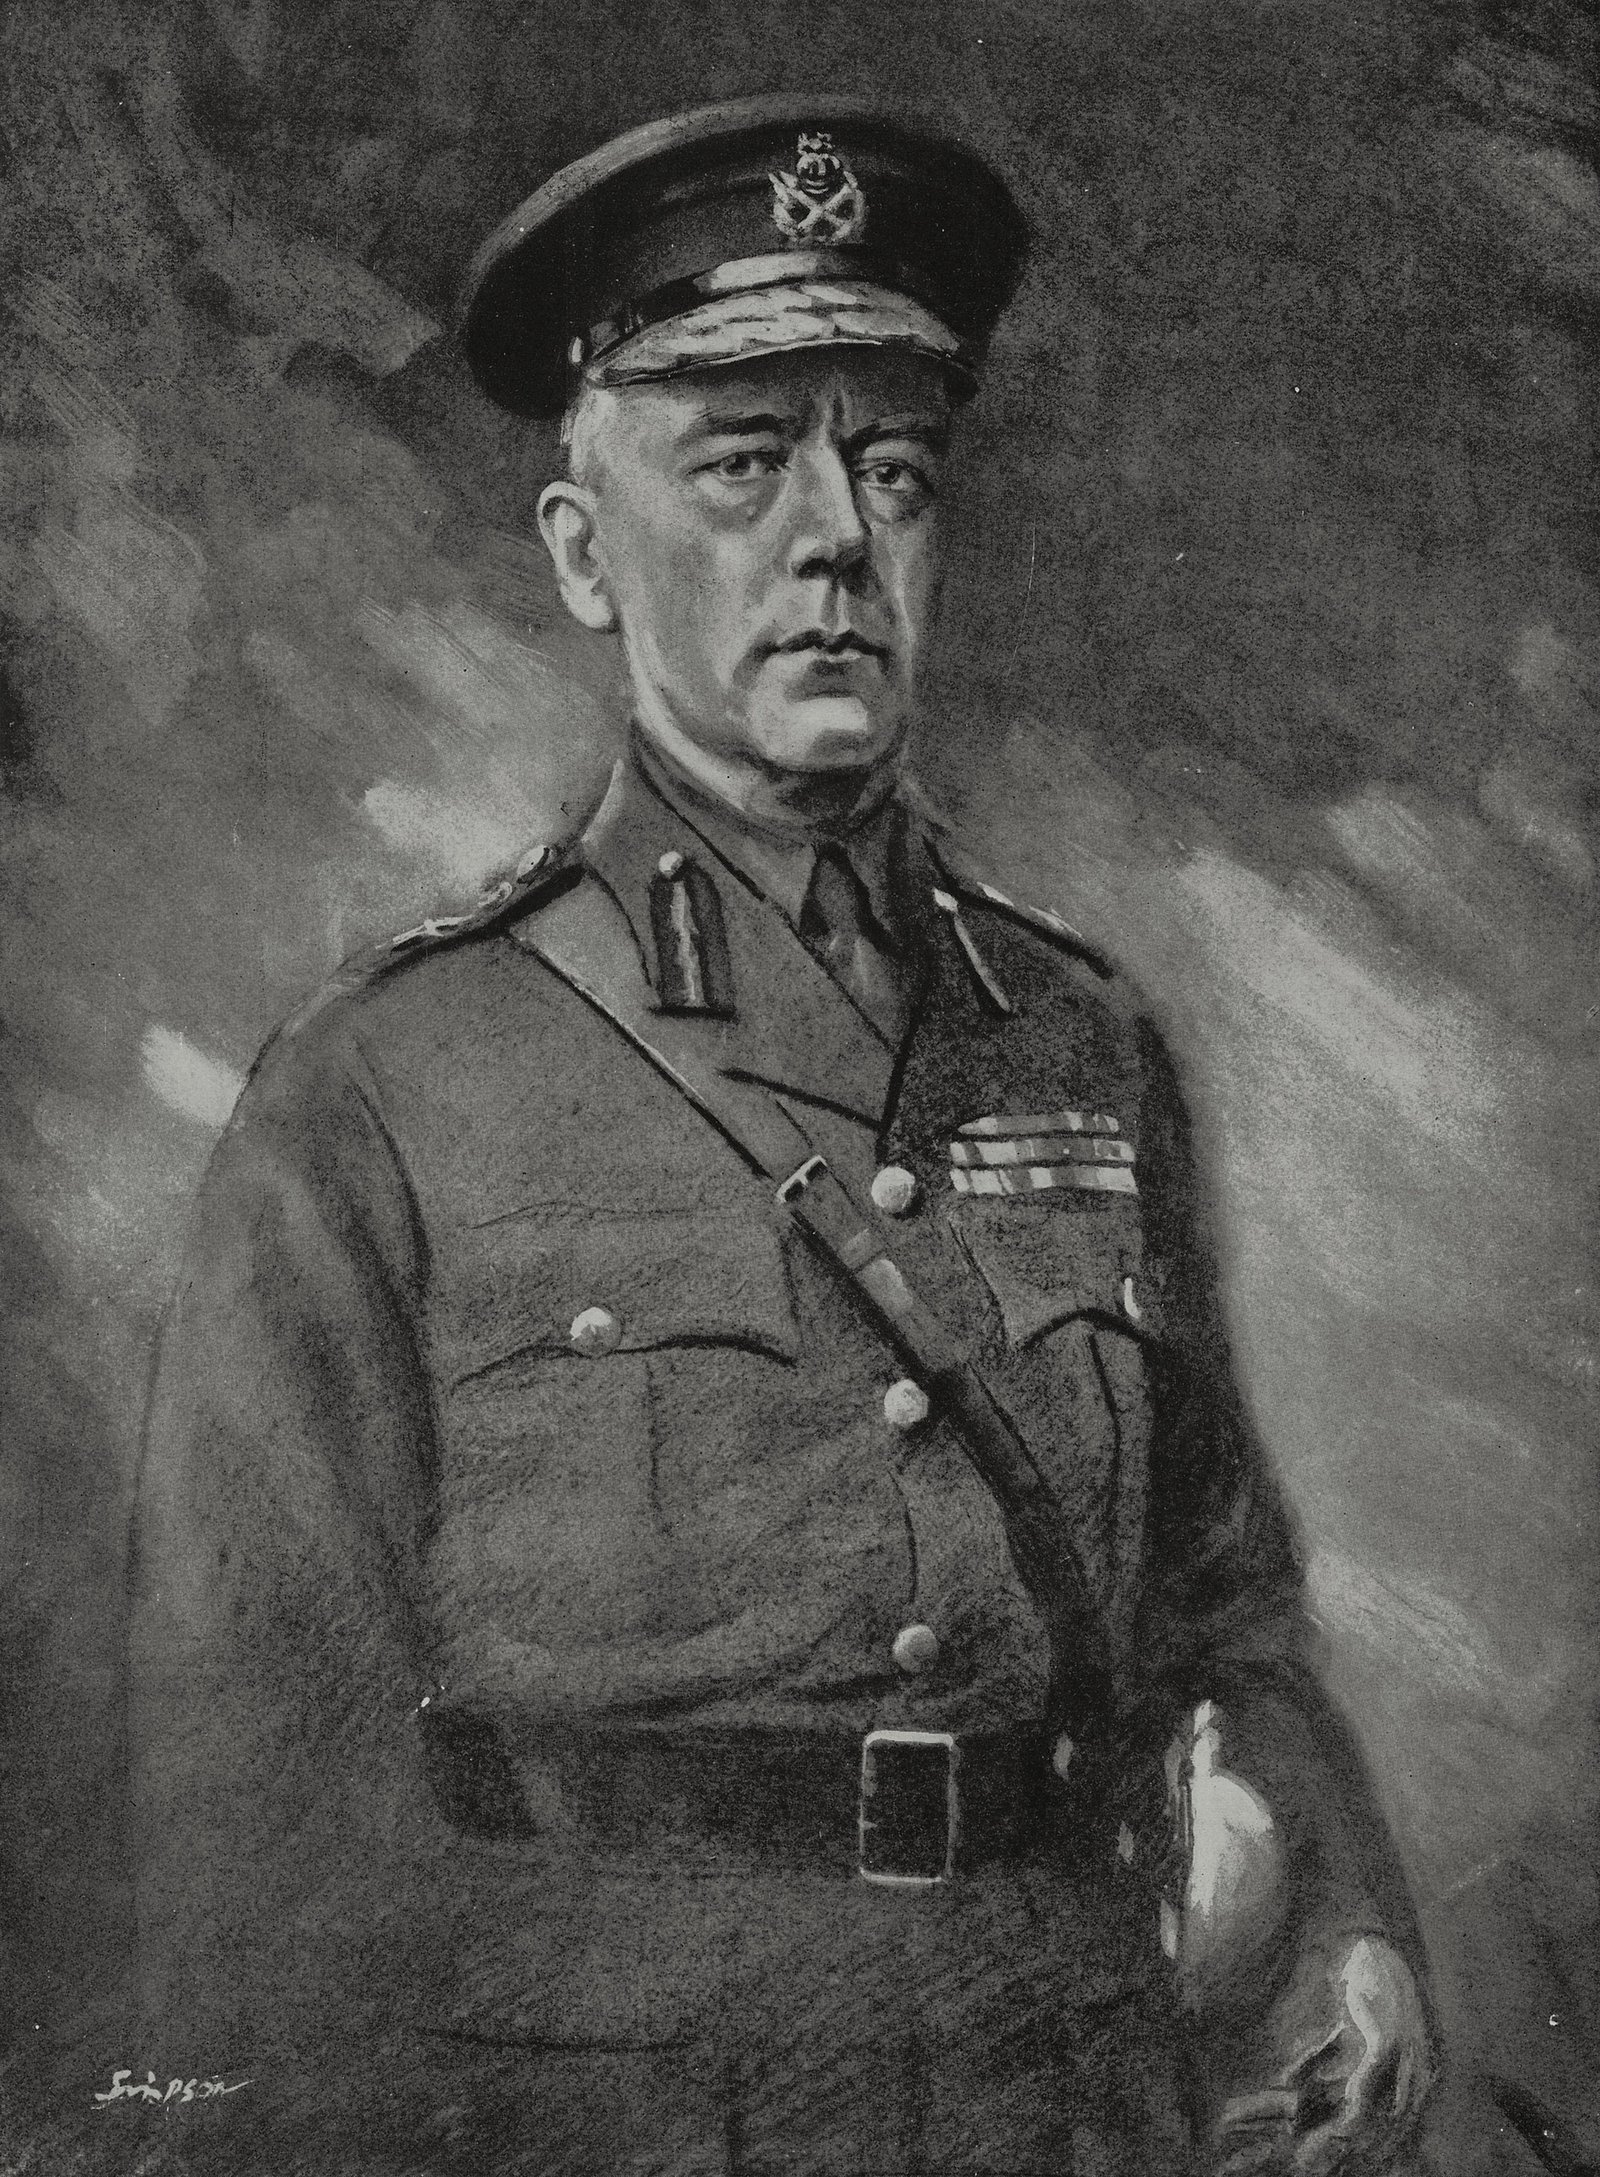 Image - General Neville Macready, commander of the British Forces in Ireland, seen in the Illustrated London News July 31, 1920. Photo: Getty Images